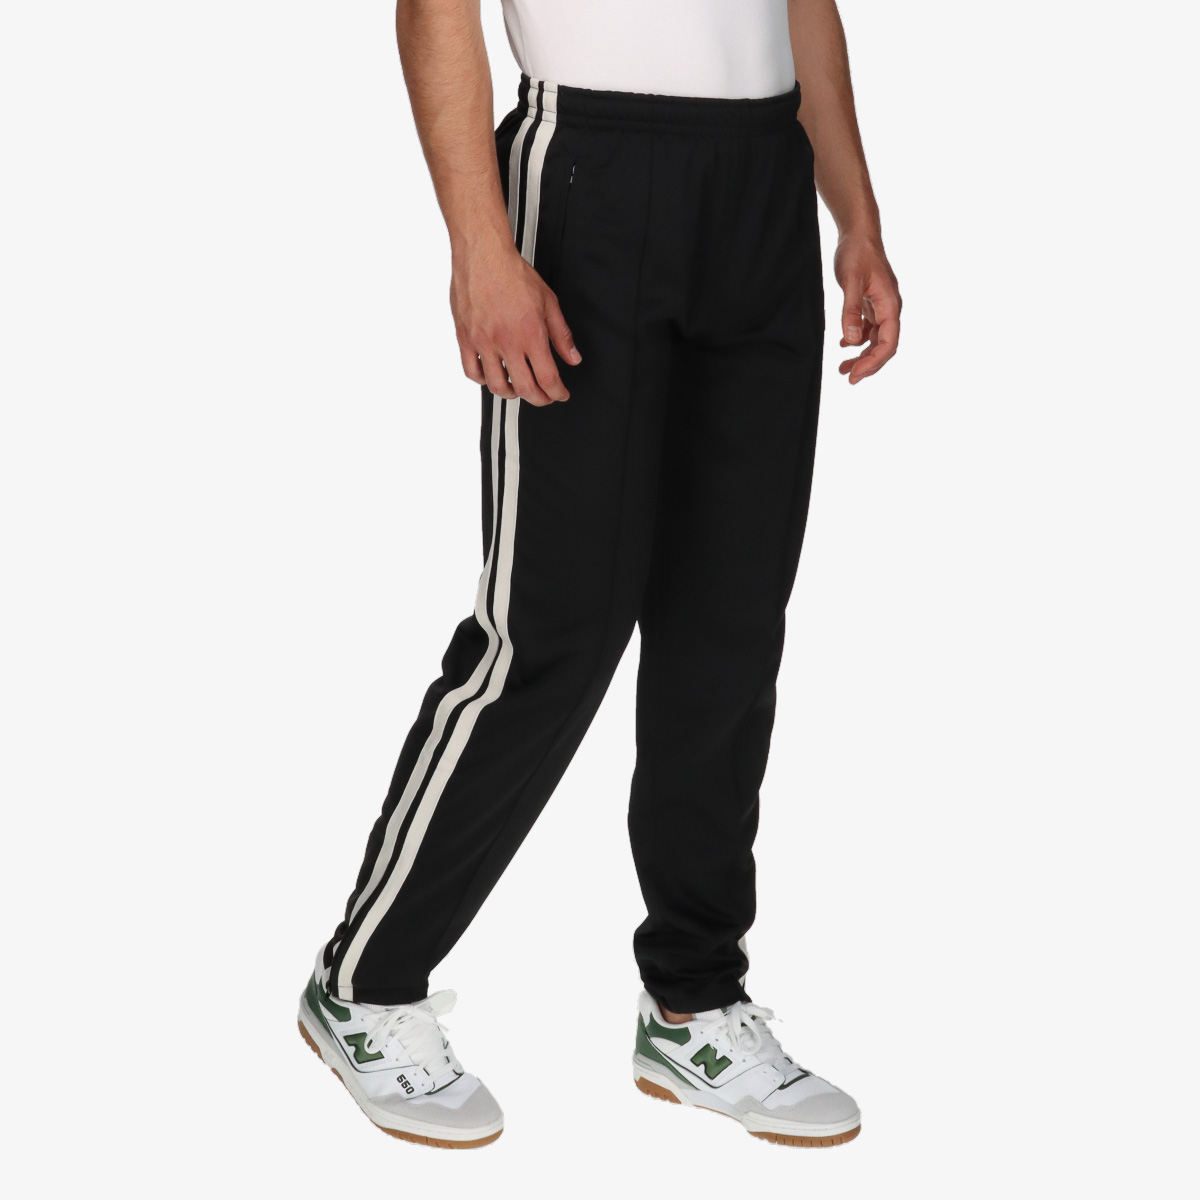 Russell Athletic Donji deo trenerke ALISTAIR-TRACK PANT 